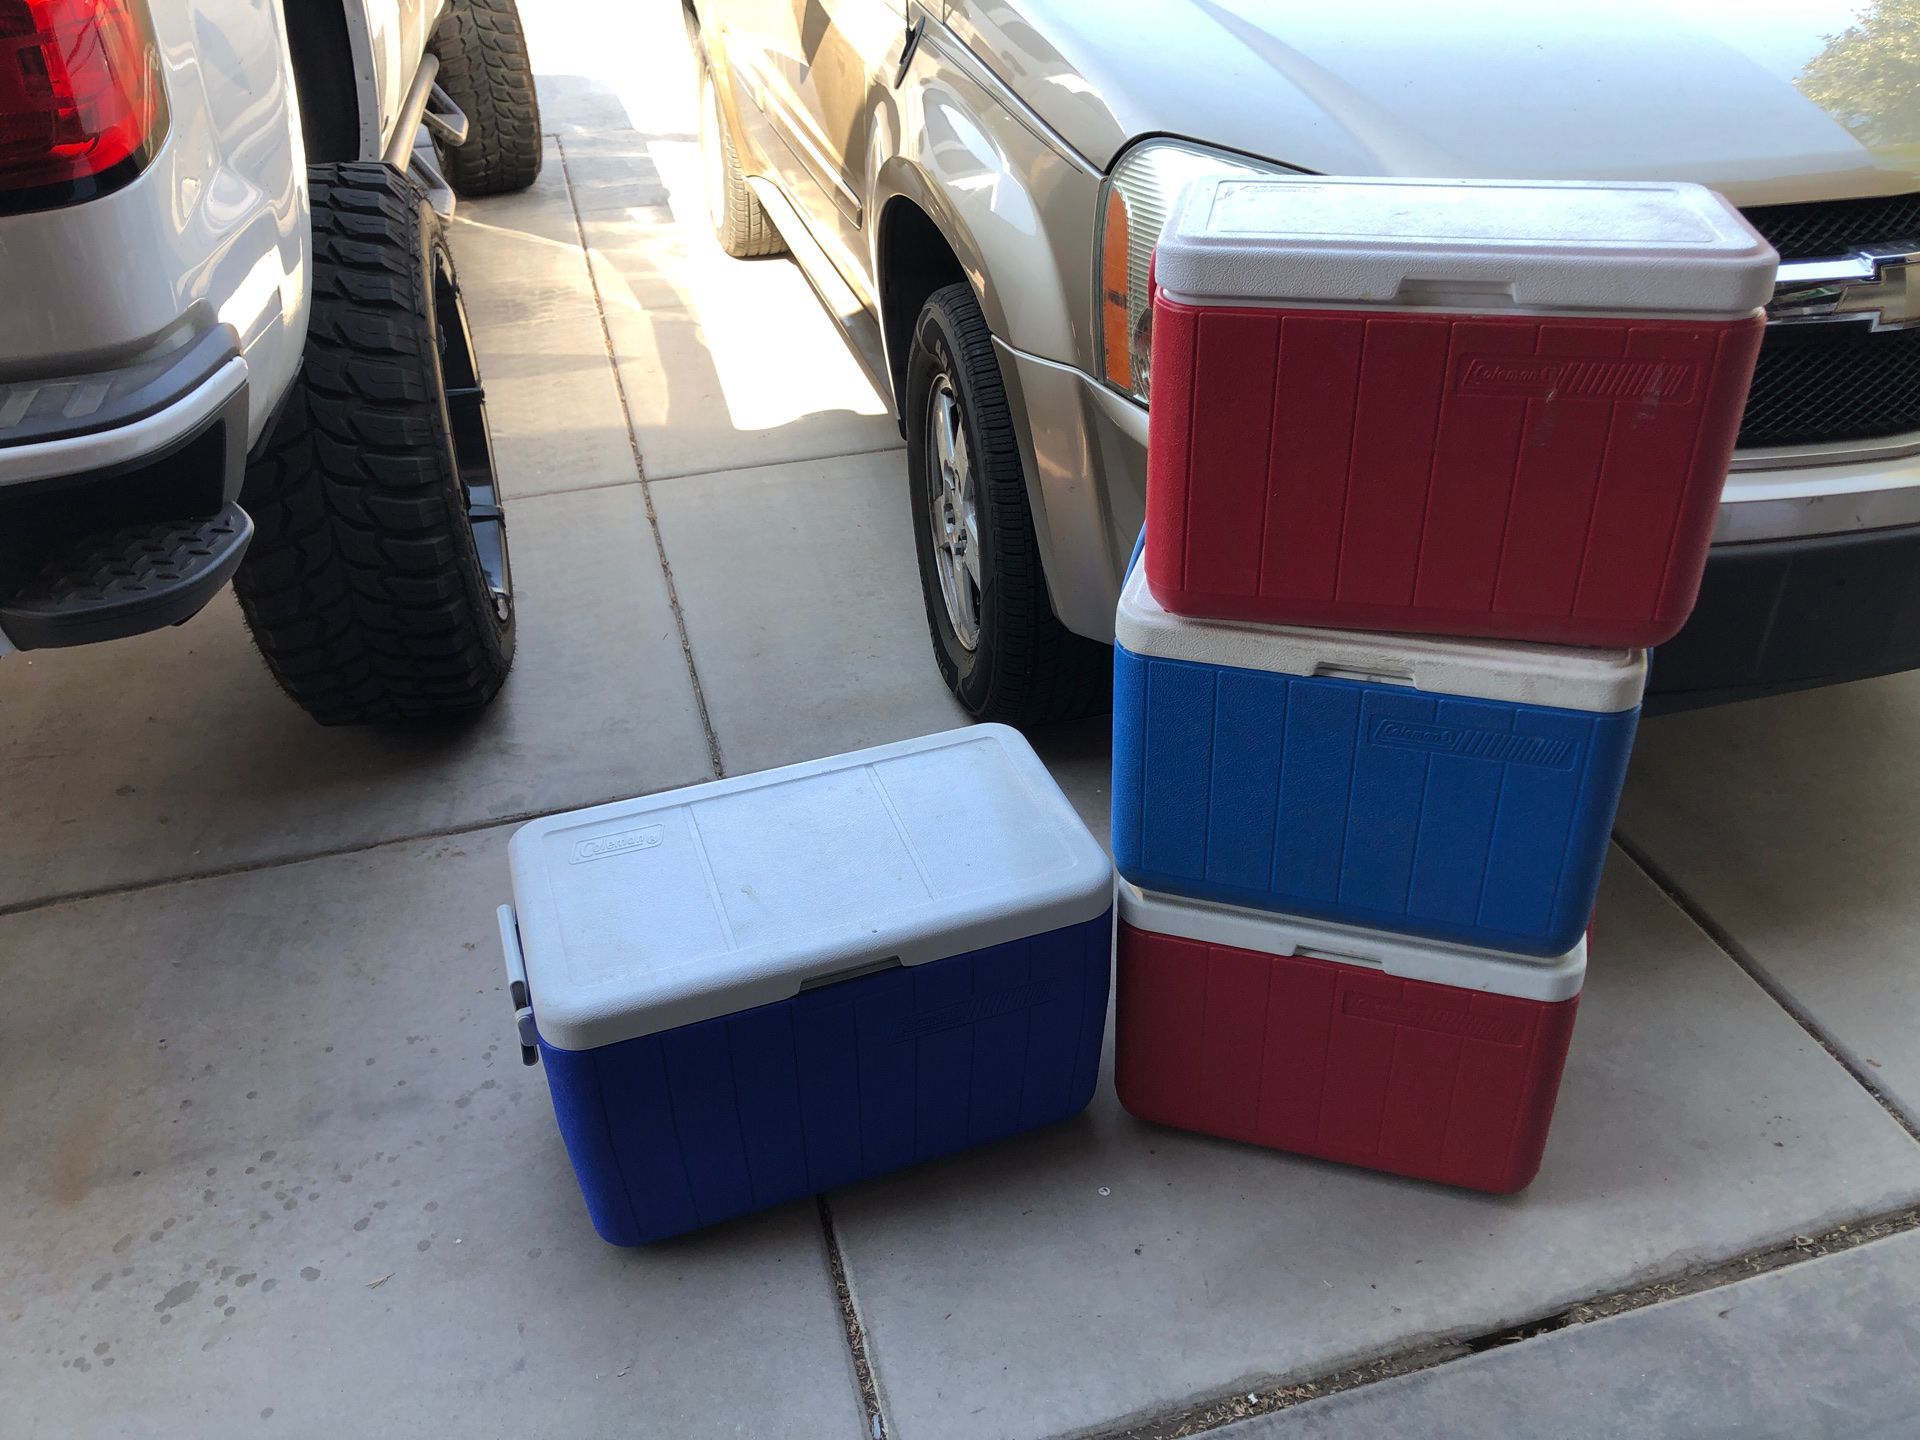 Coleman coolers $15 each or all for $45